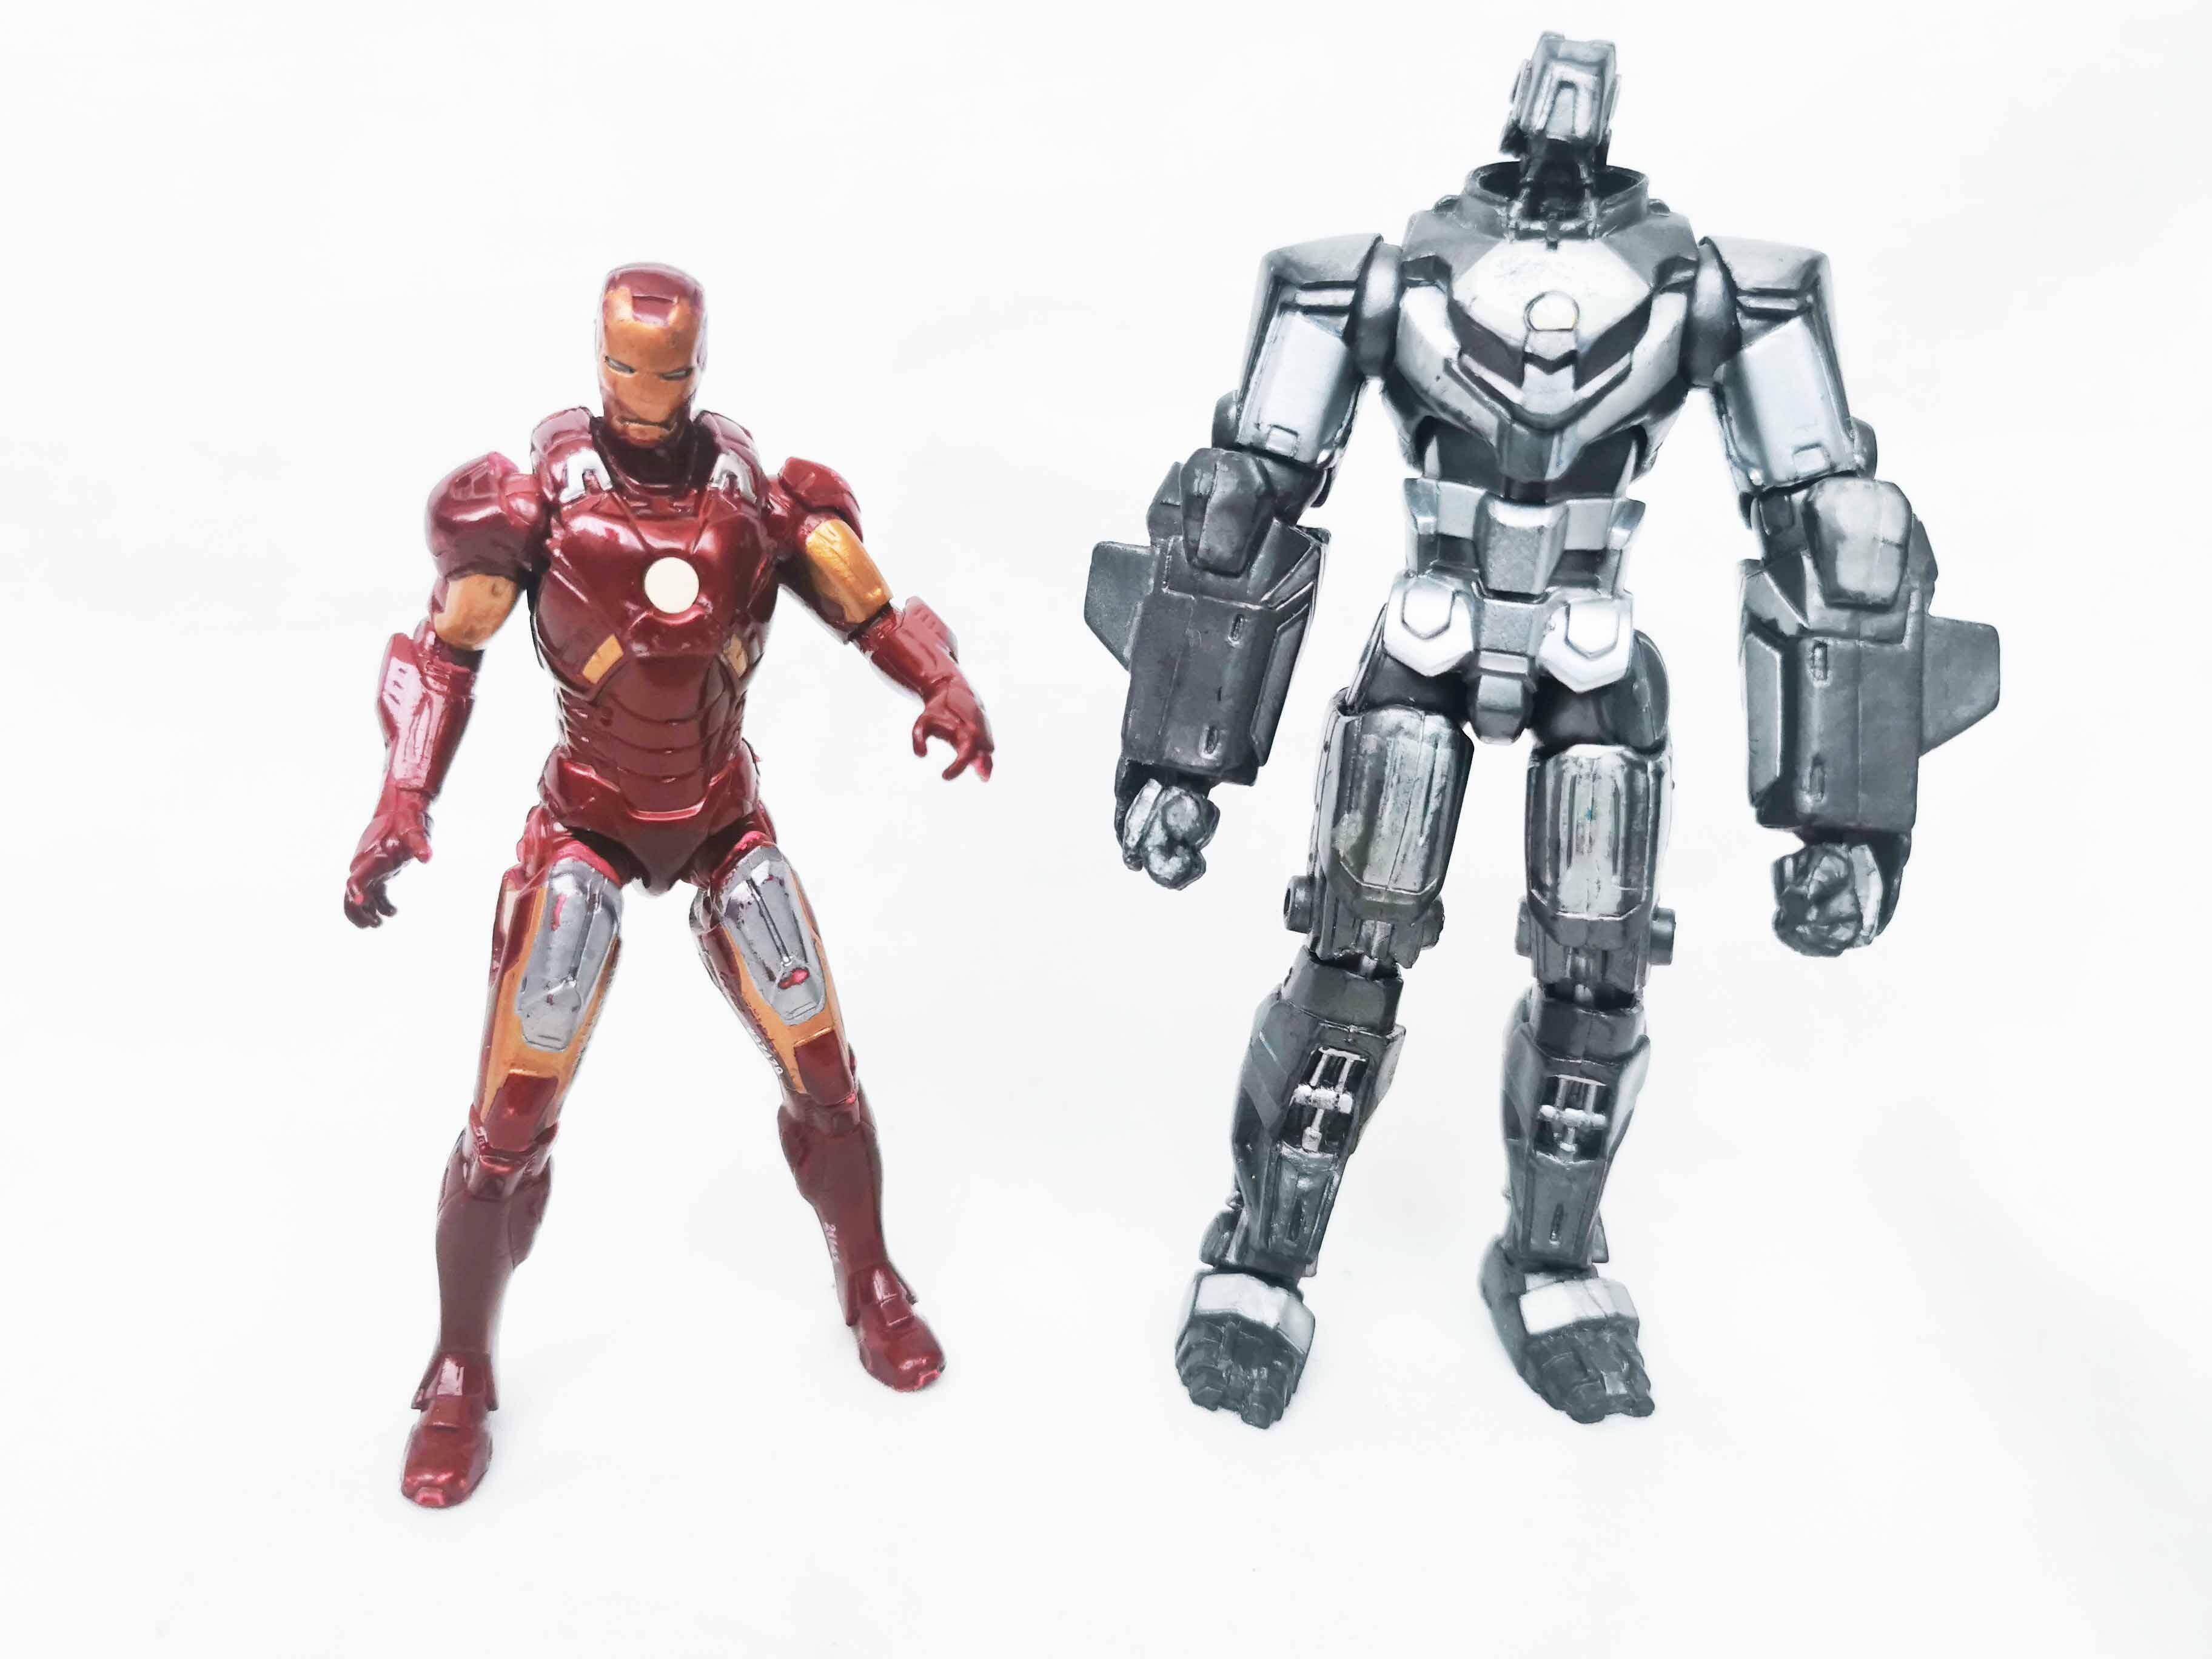 Iron Man and Assault Drone Marvel Universe Avengers Movie Action figures 3.75